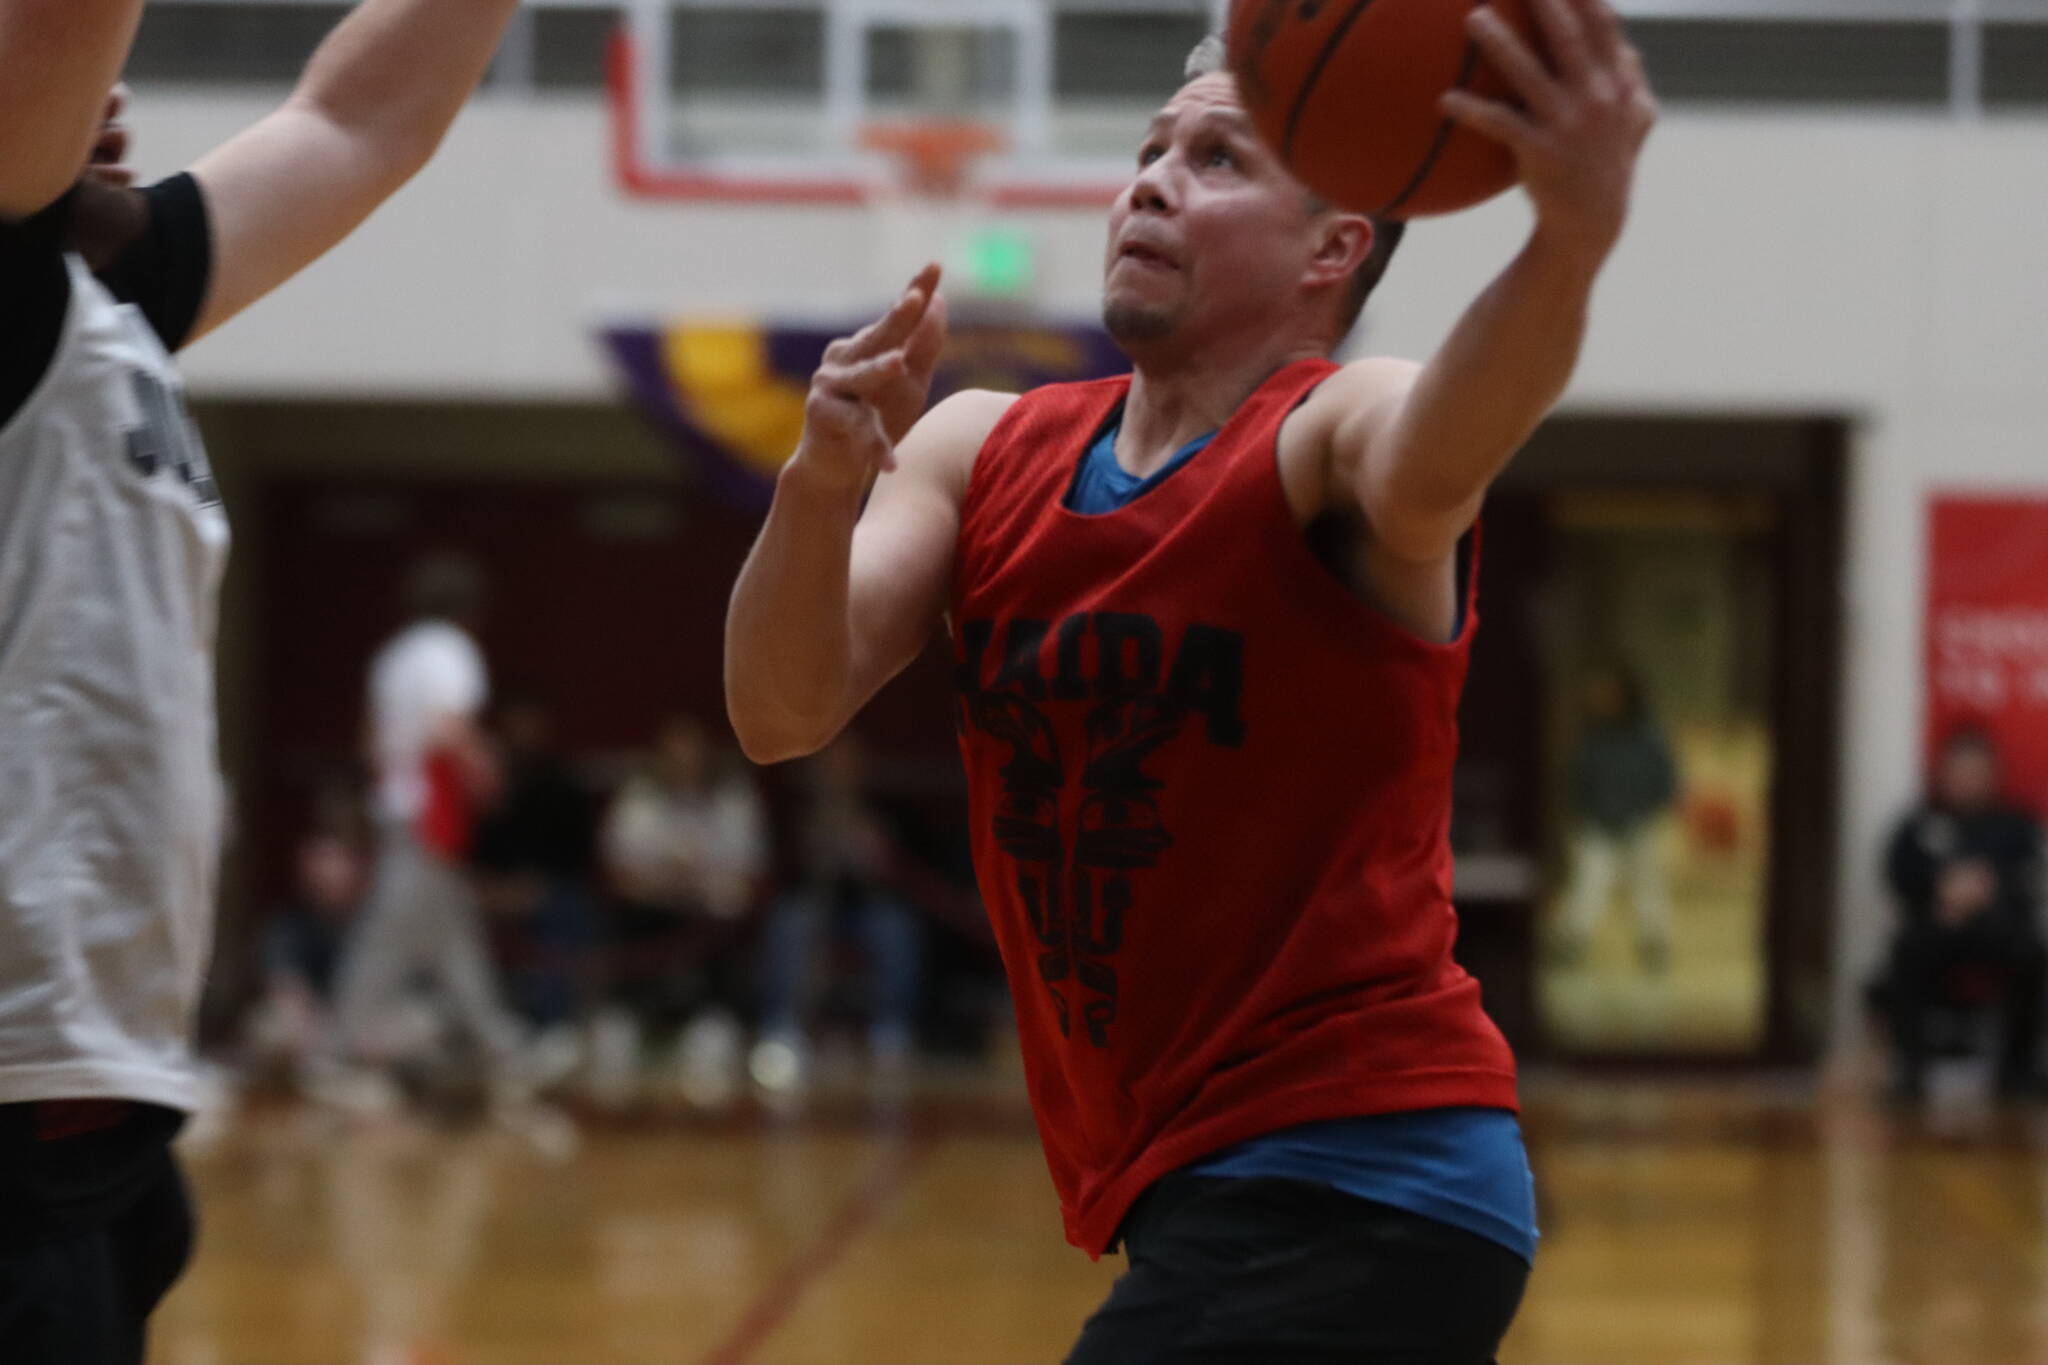 Hydaburg’s Vinny Edenshaw runs in for a layup against Juneau in the B bracket championship game in the Gold Medal Basketball Tournament on Saturday. Edenshaw led his team in scoring for a total of 24 points and earned All-Tournament honors, as well. (Jonson Kuhn / Juneau Empire)